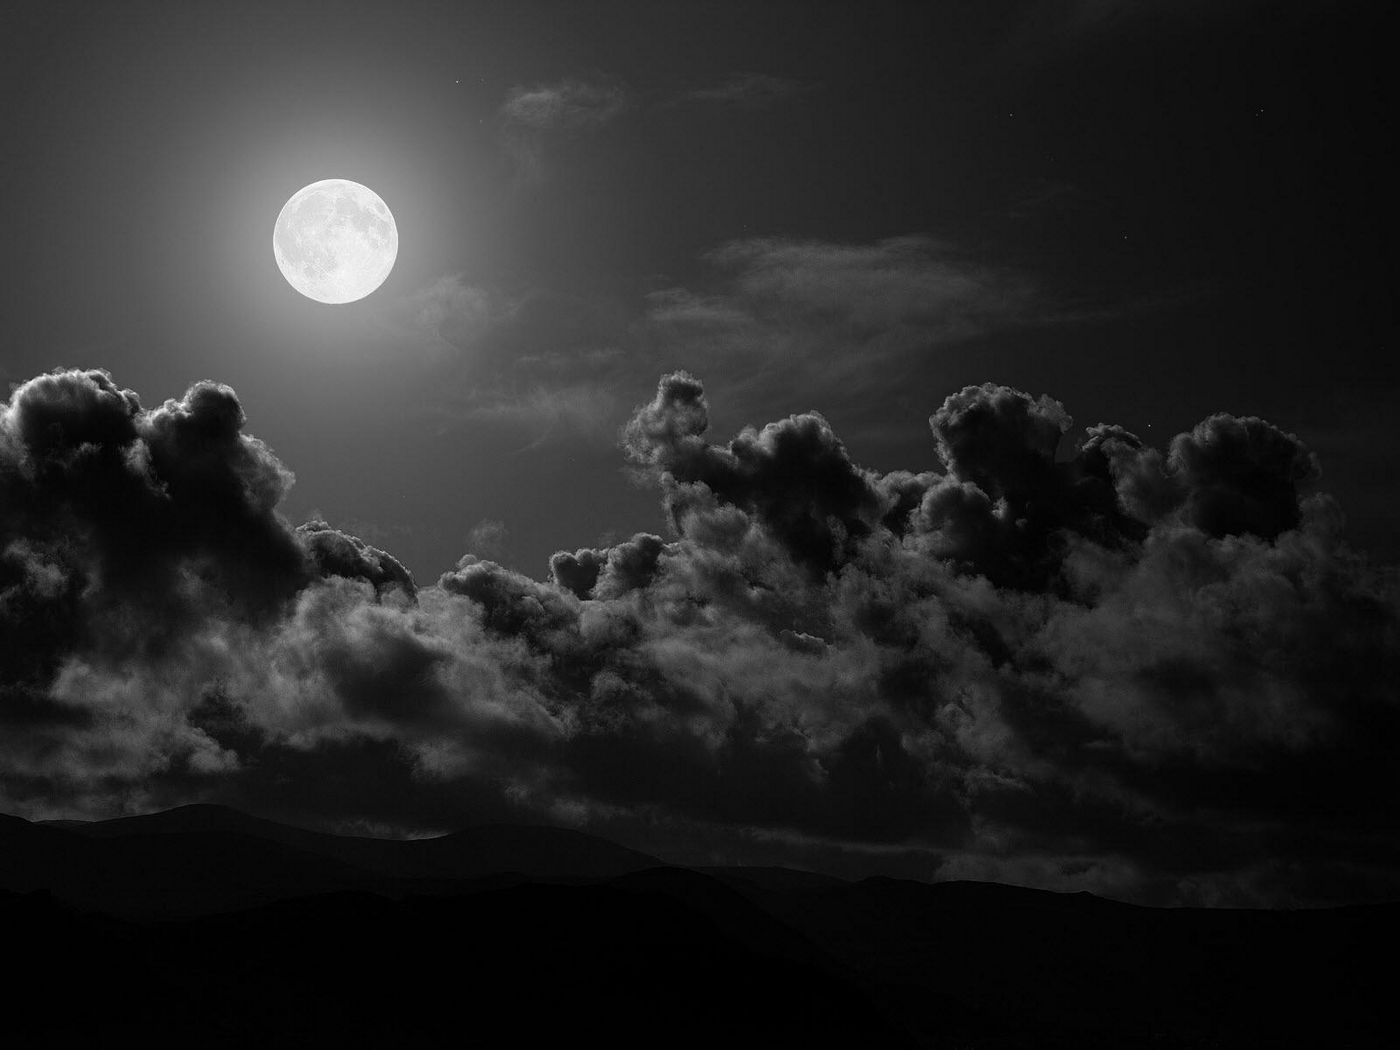 Download Wallpaper 1400x1050 Moon, Clouds, Sky, Black And White Standard 4:3 HD Background